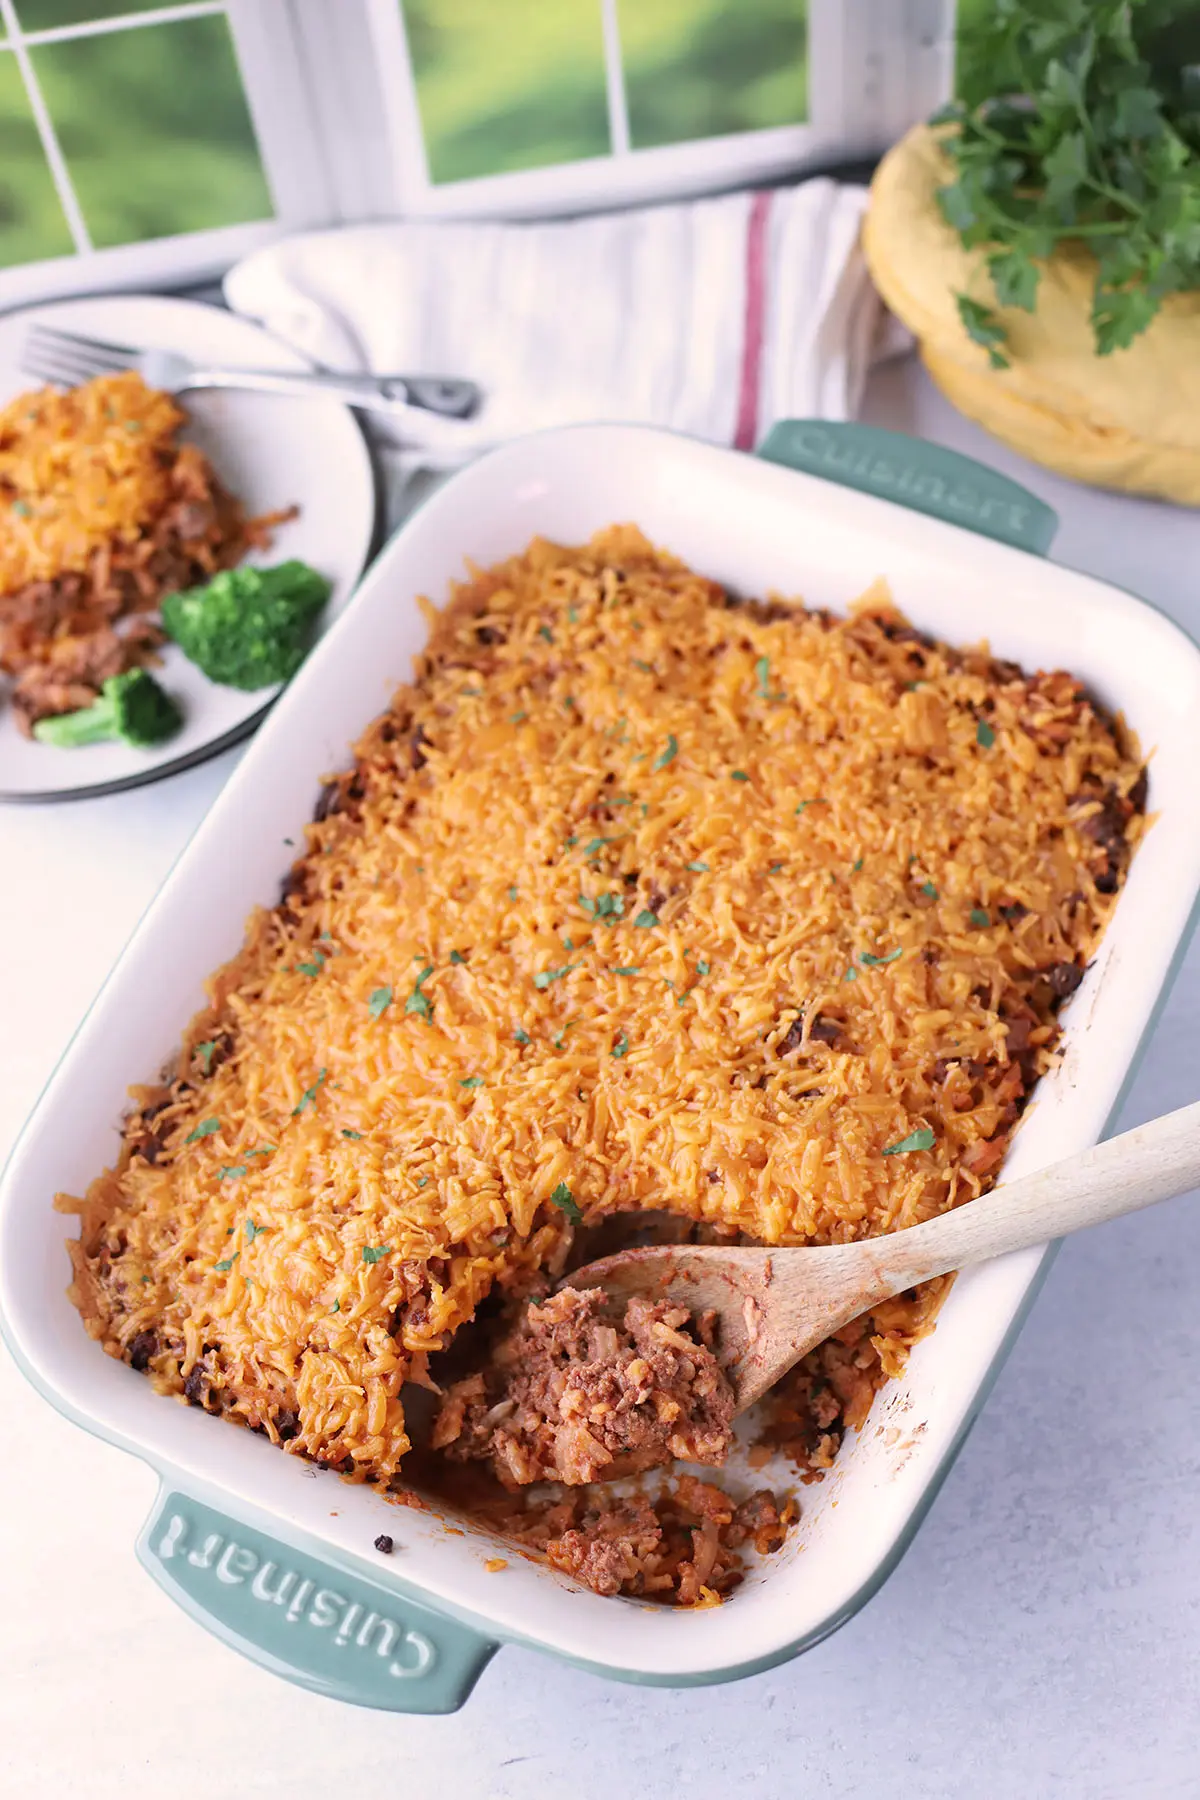 A bird's eye look at a ground beef hashbrown casserole with a wooden spoon.